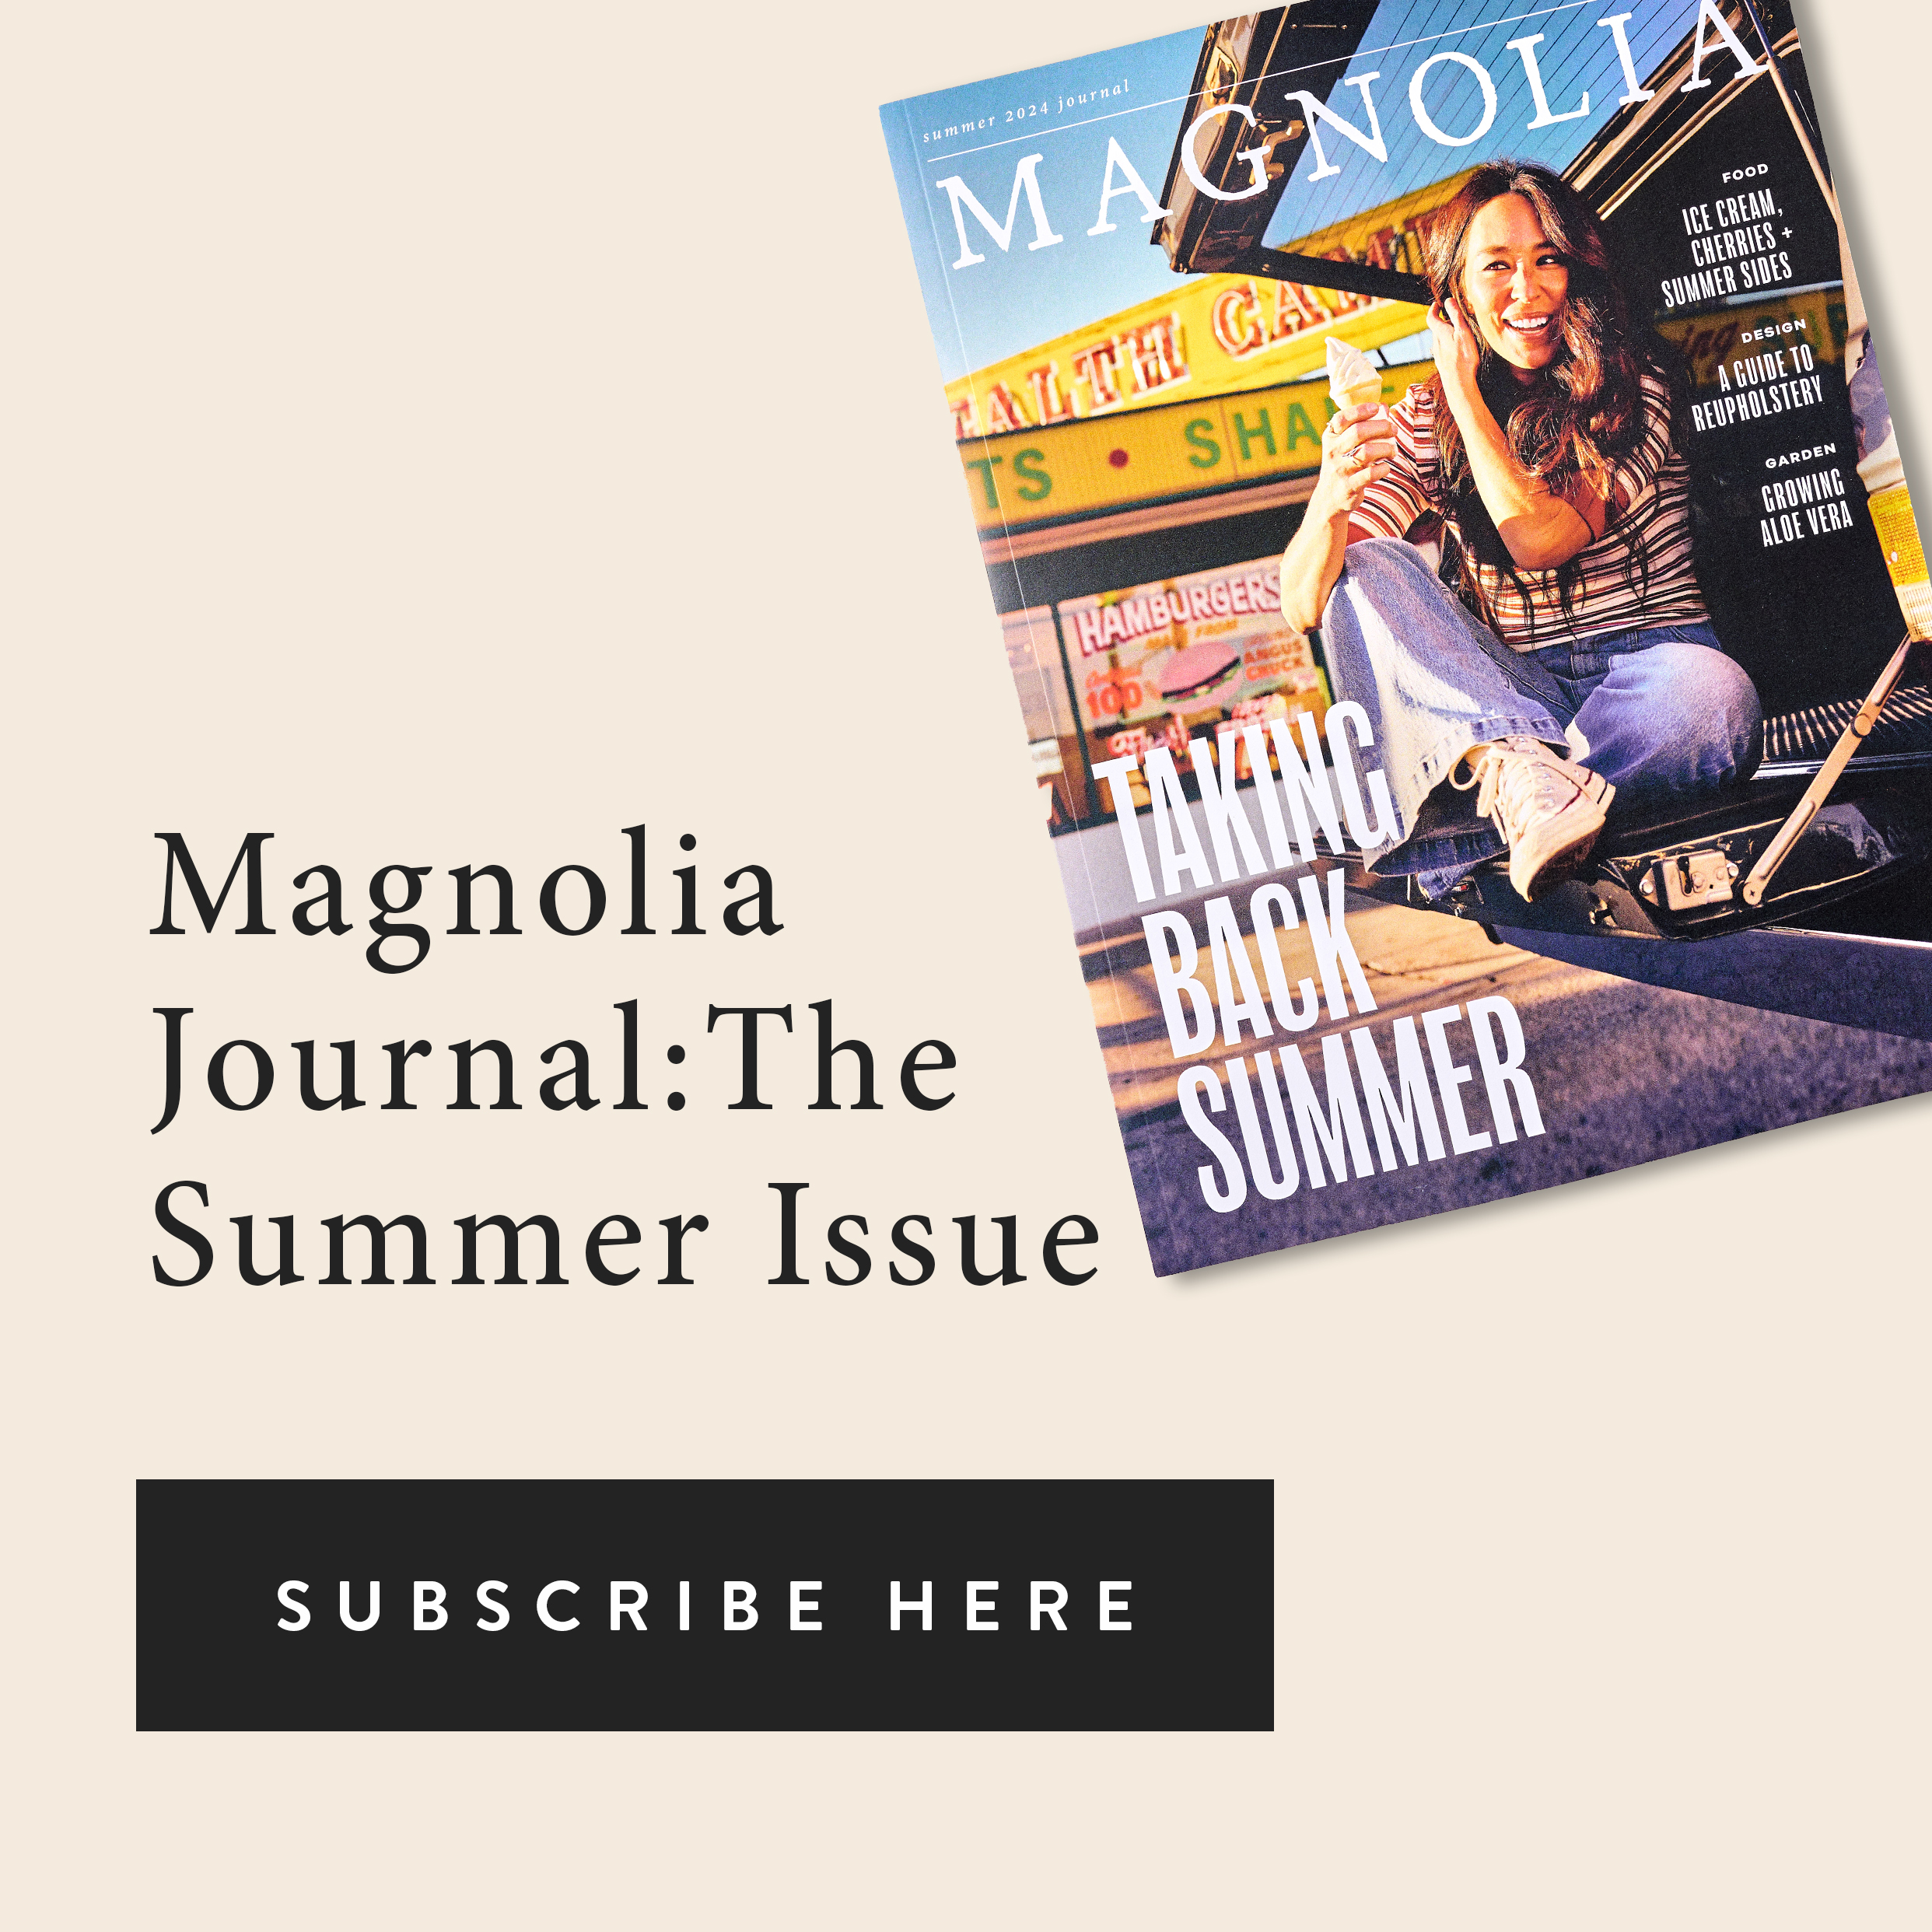 Magnolia Journal: The Summer Issue.  Subscribe here.